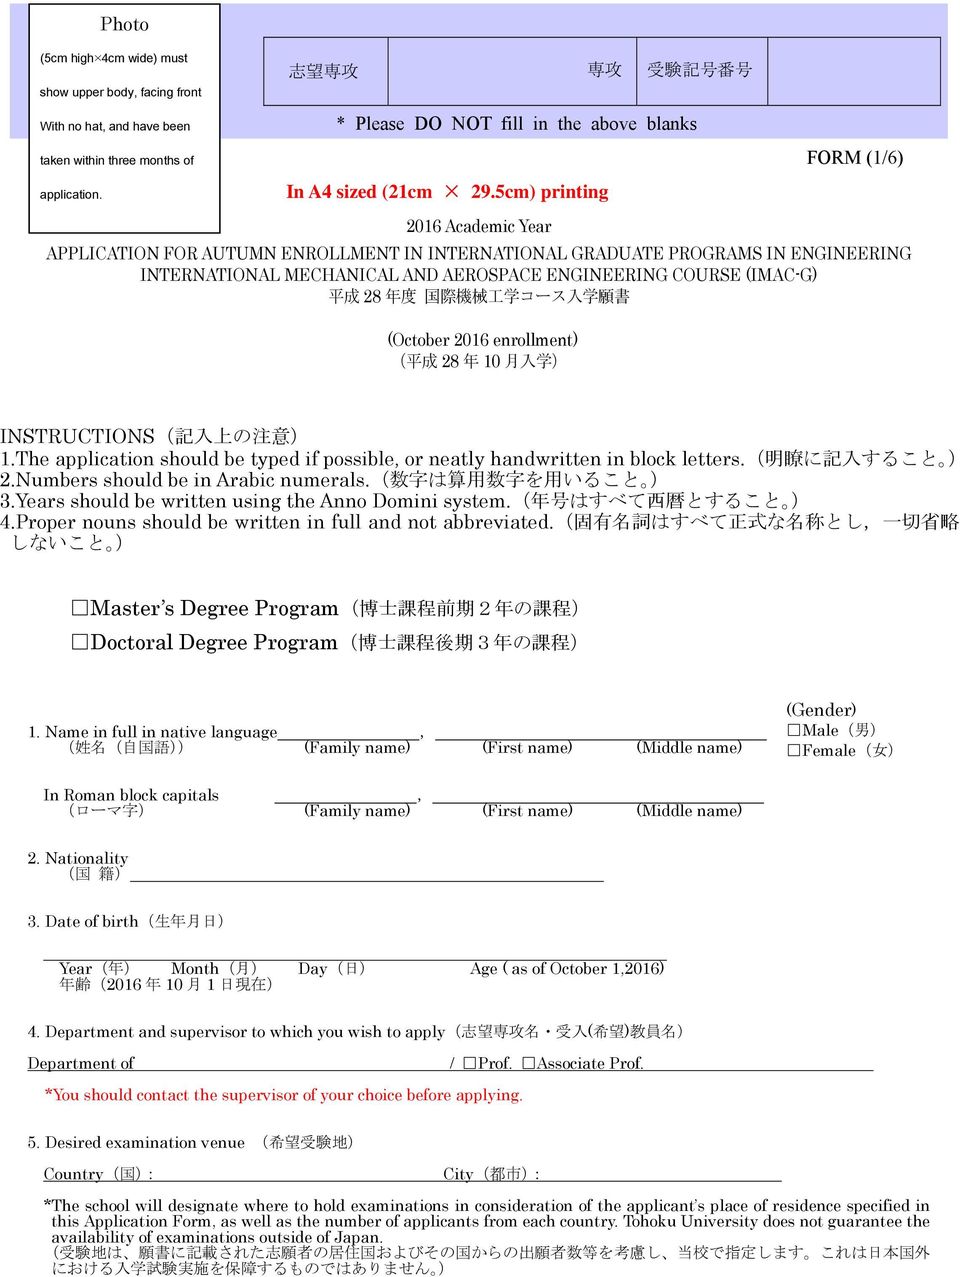 5cm) printing FORM (1/6) 2016 Academic Year APPLICATION FOR AUTUMN ENROLLMENT IN INTERNATIONAL GRADUATE PROGRAMS IN ENGINEERING INTERNATIONAL MECHANICAL AND AEROSPACE ENGINEERING COURSE (IMAC-G) 平 成